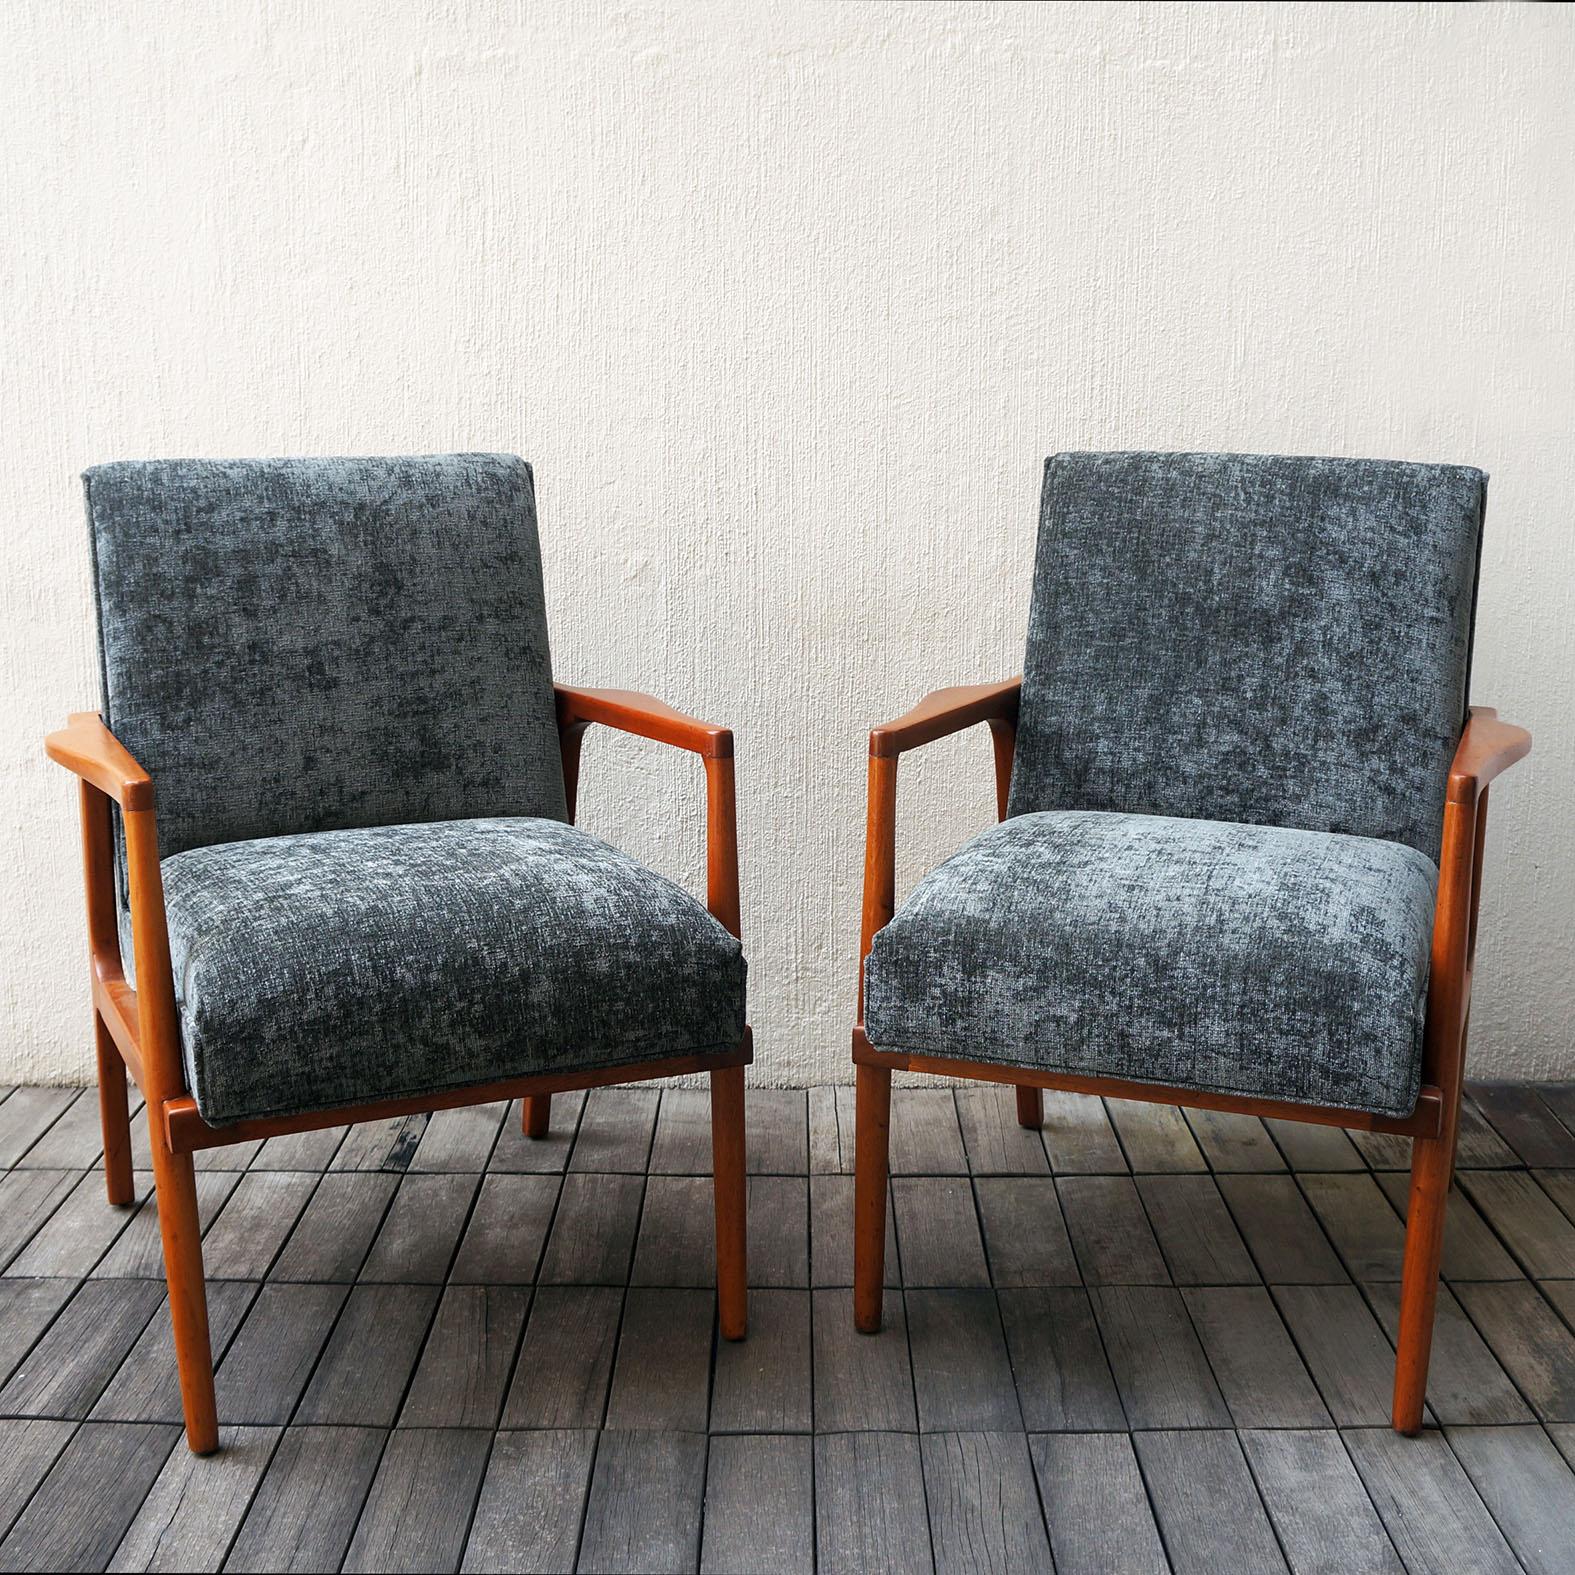 Mid-20th Century Pair of Lounge Chairs by Irgsa, Mexican Modernism, 1950s